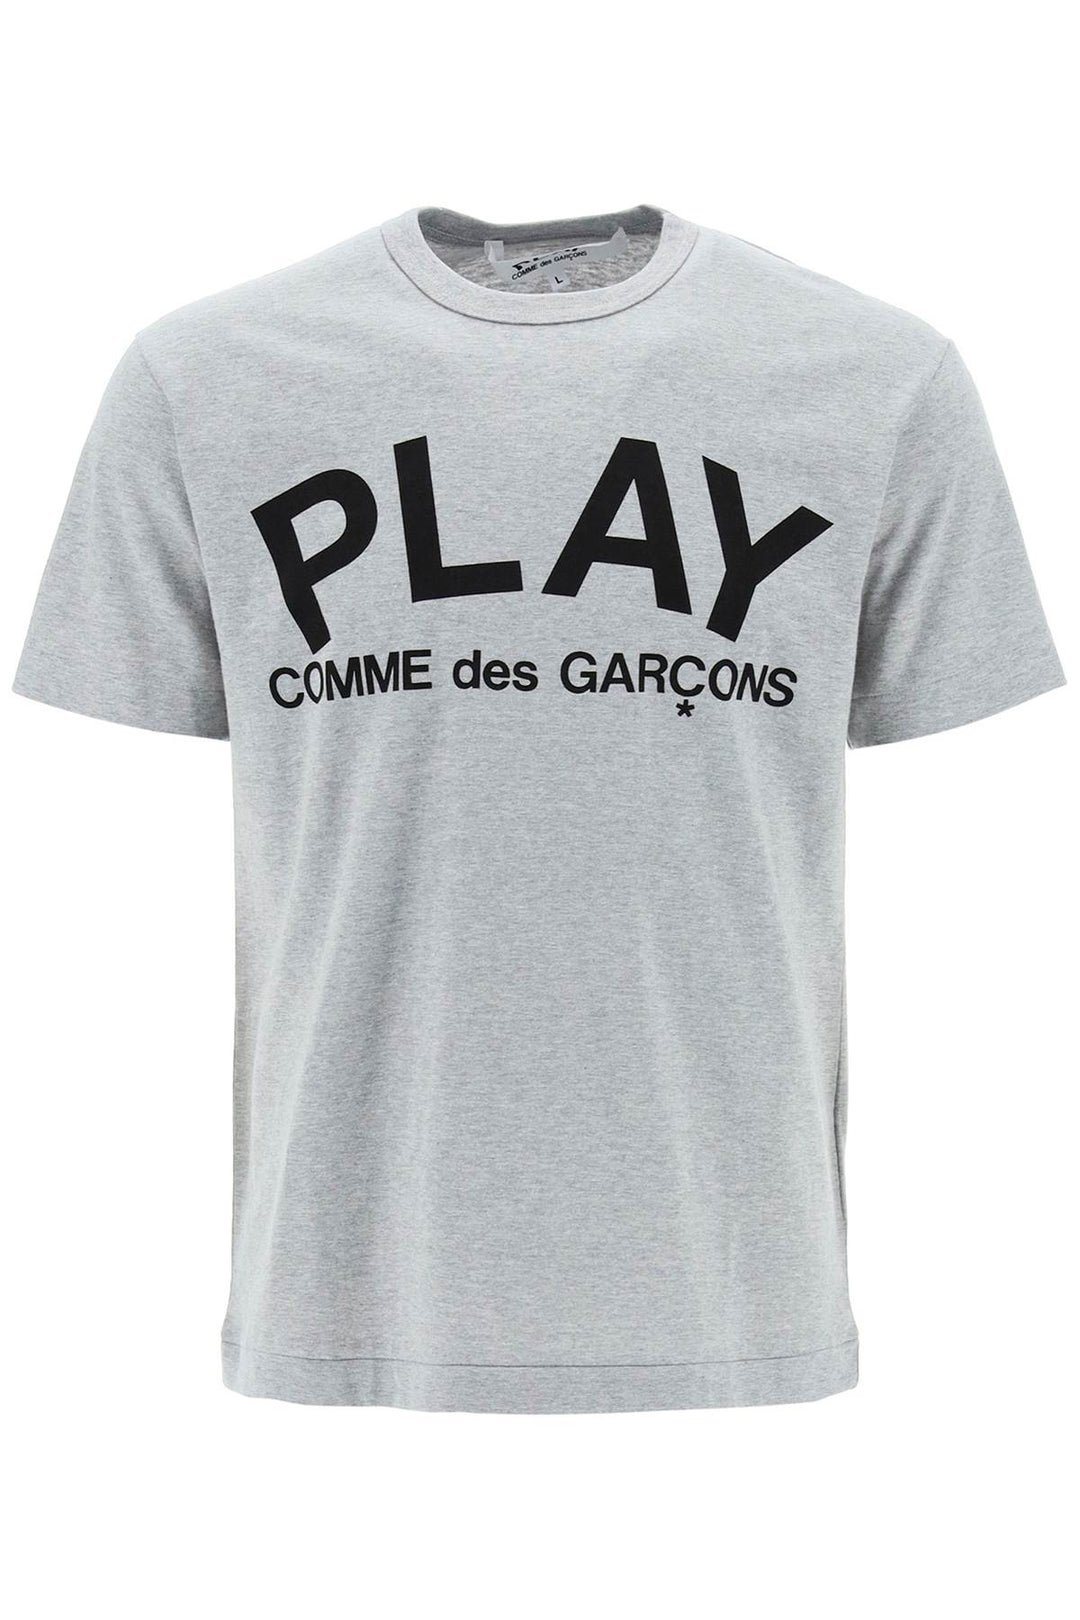 Comme Des Garcons Play T Shirt With Play Print   Grigio